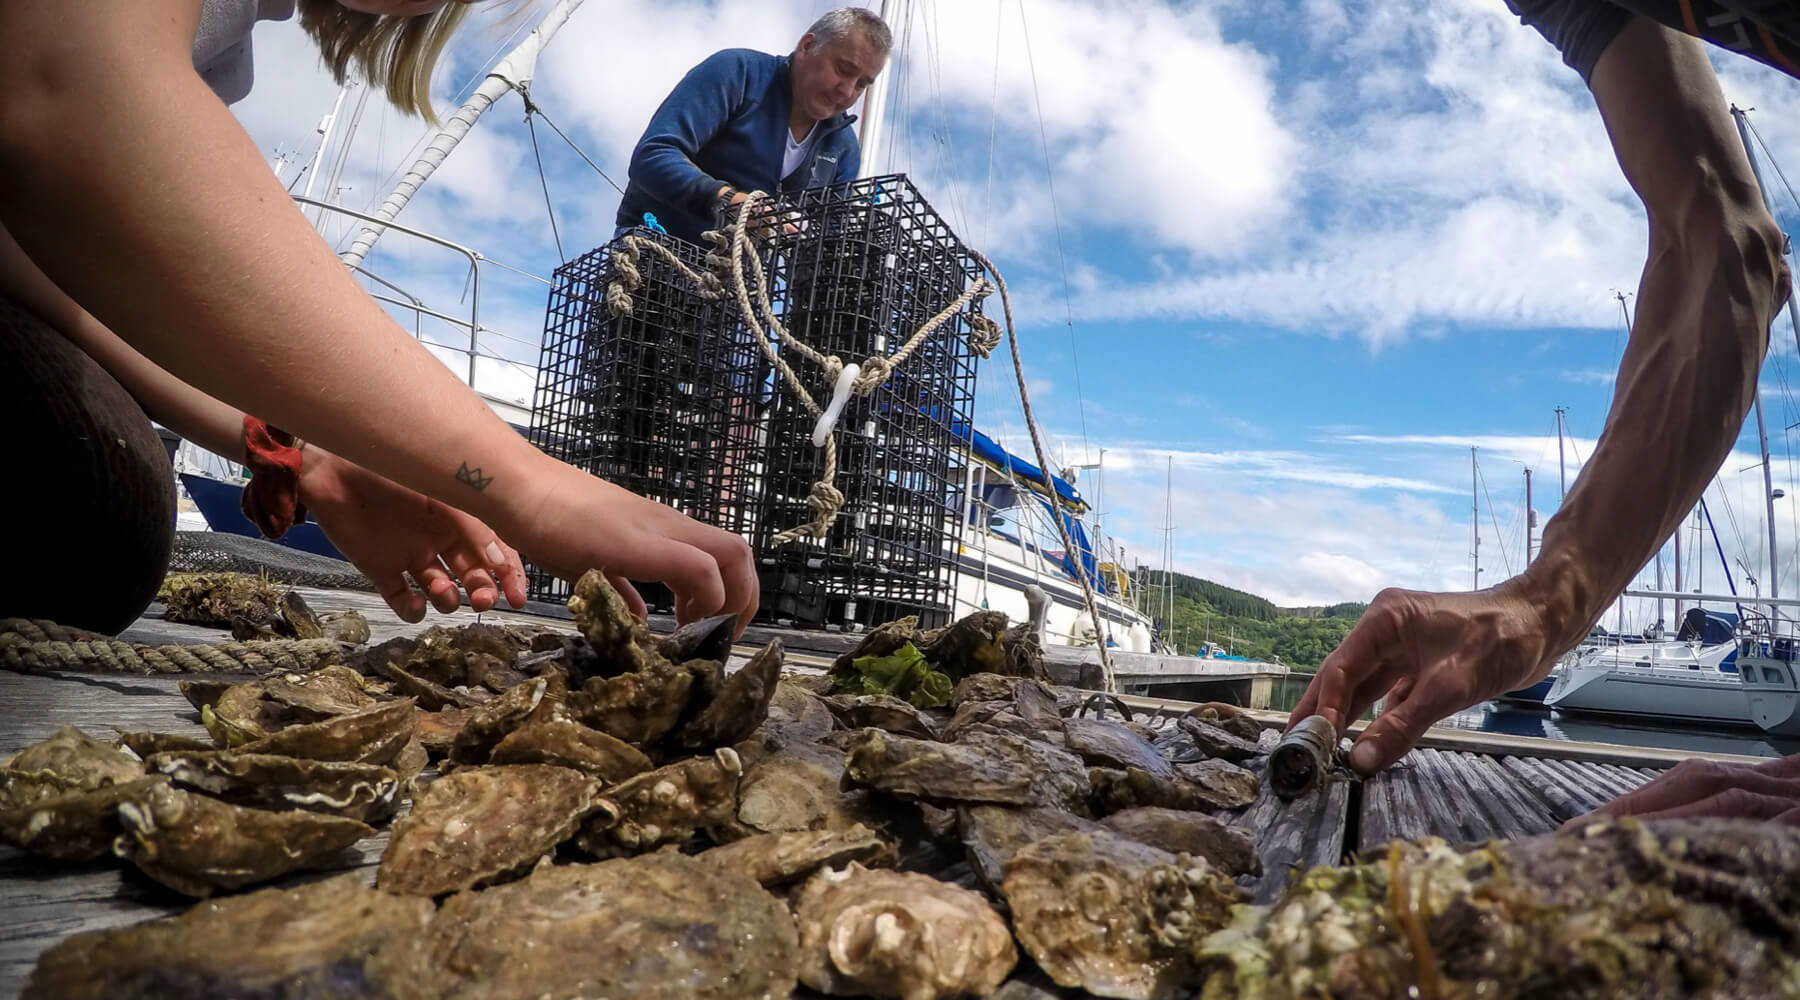 Turning the Tide on Scotland’s Shallow Reefs